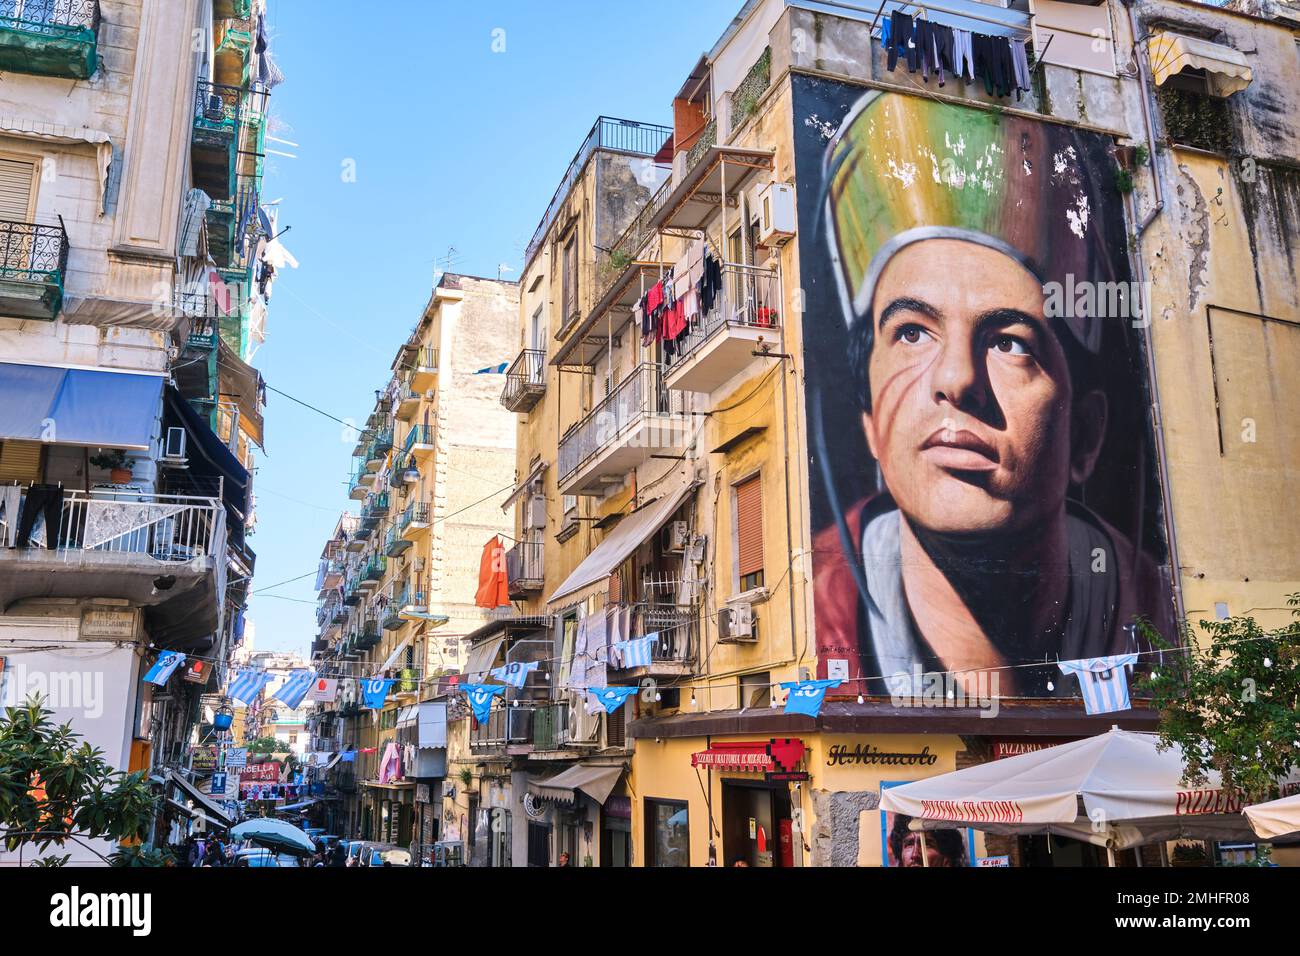 A huge mural in the Forcella neighborhood by artist Jorit Agoch. It depicts the city's patron saint, Gennaro, as a young factory worker, similar to a Stock Photo